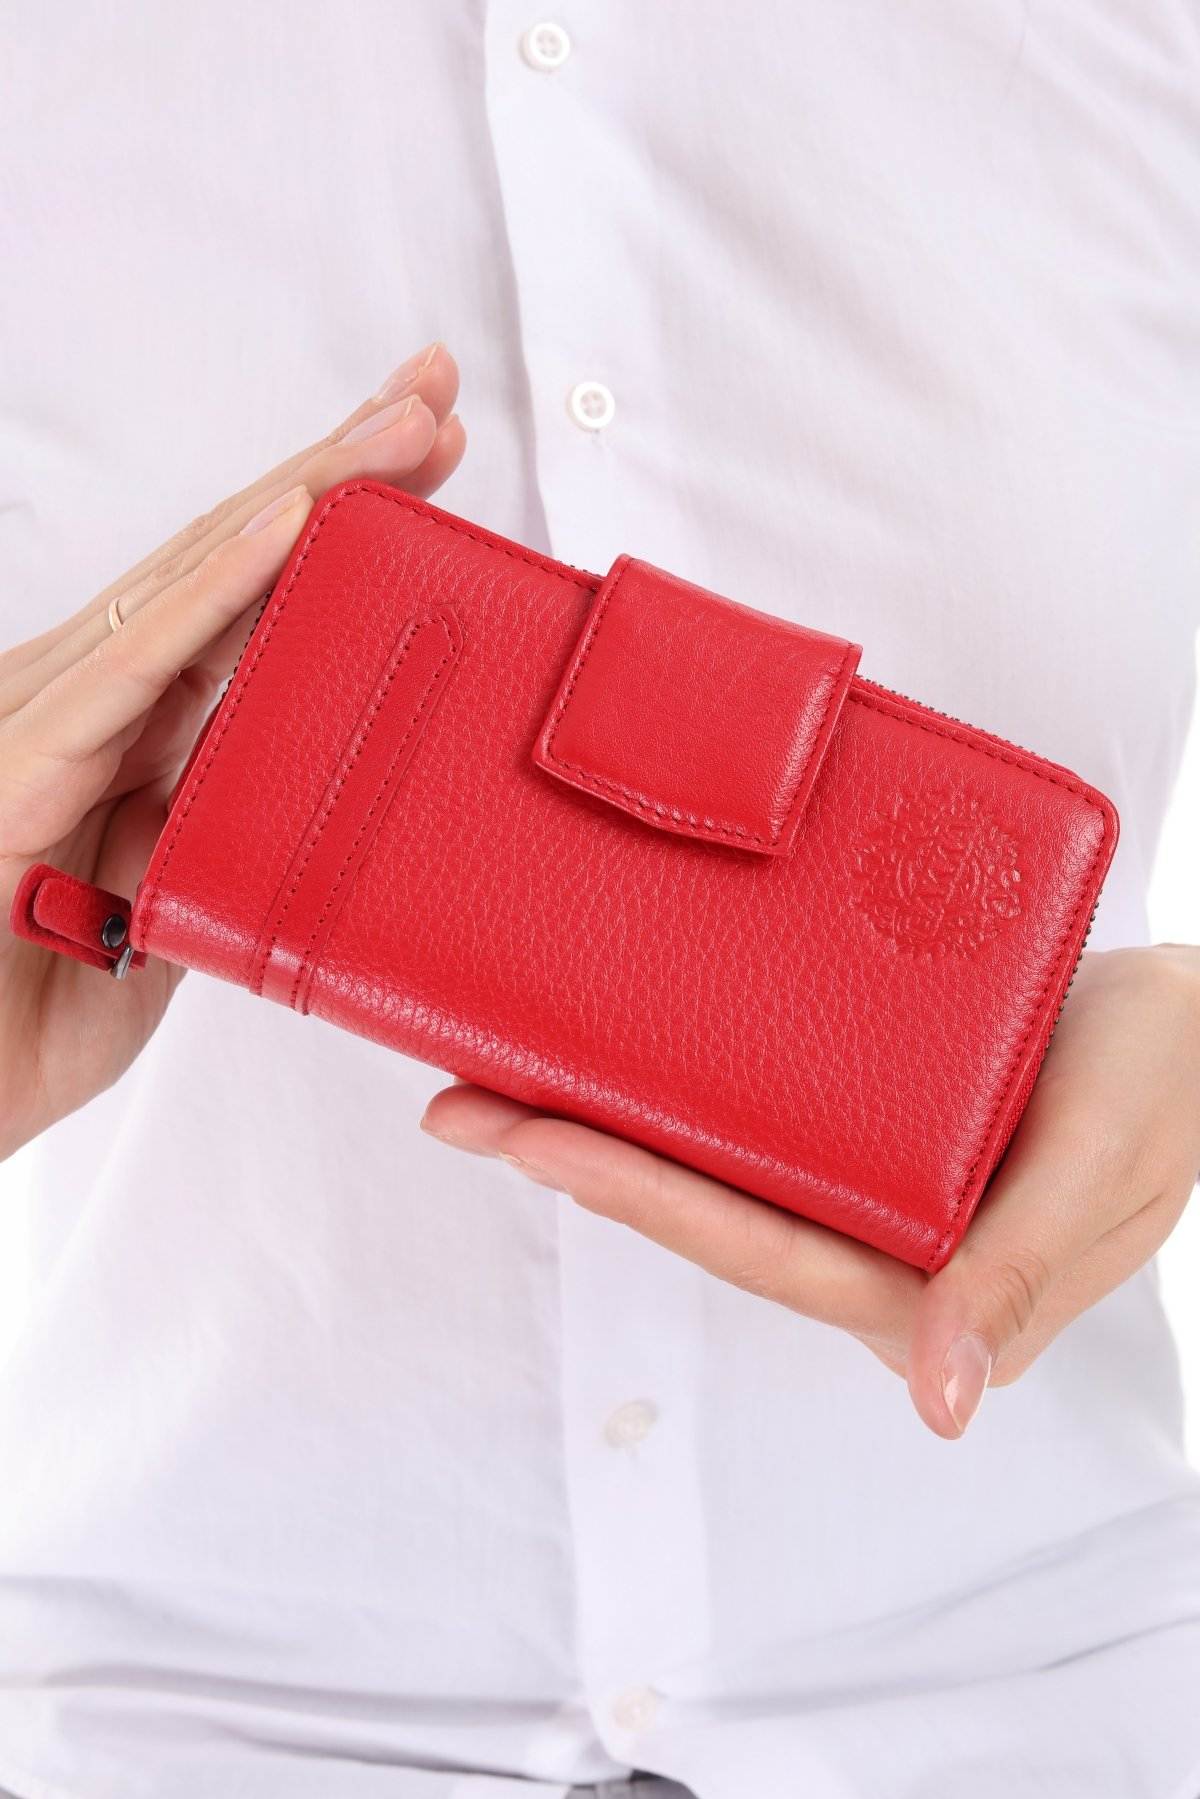 471 - Leather wallet -  Red - bakkaclothing